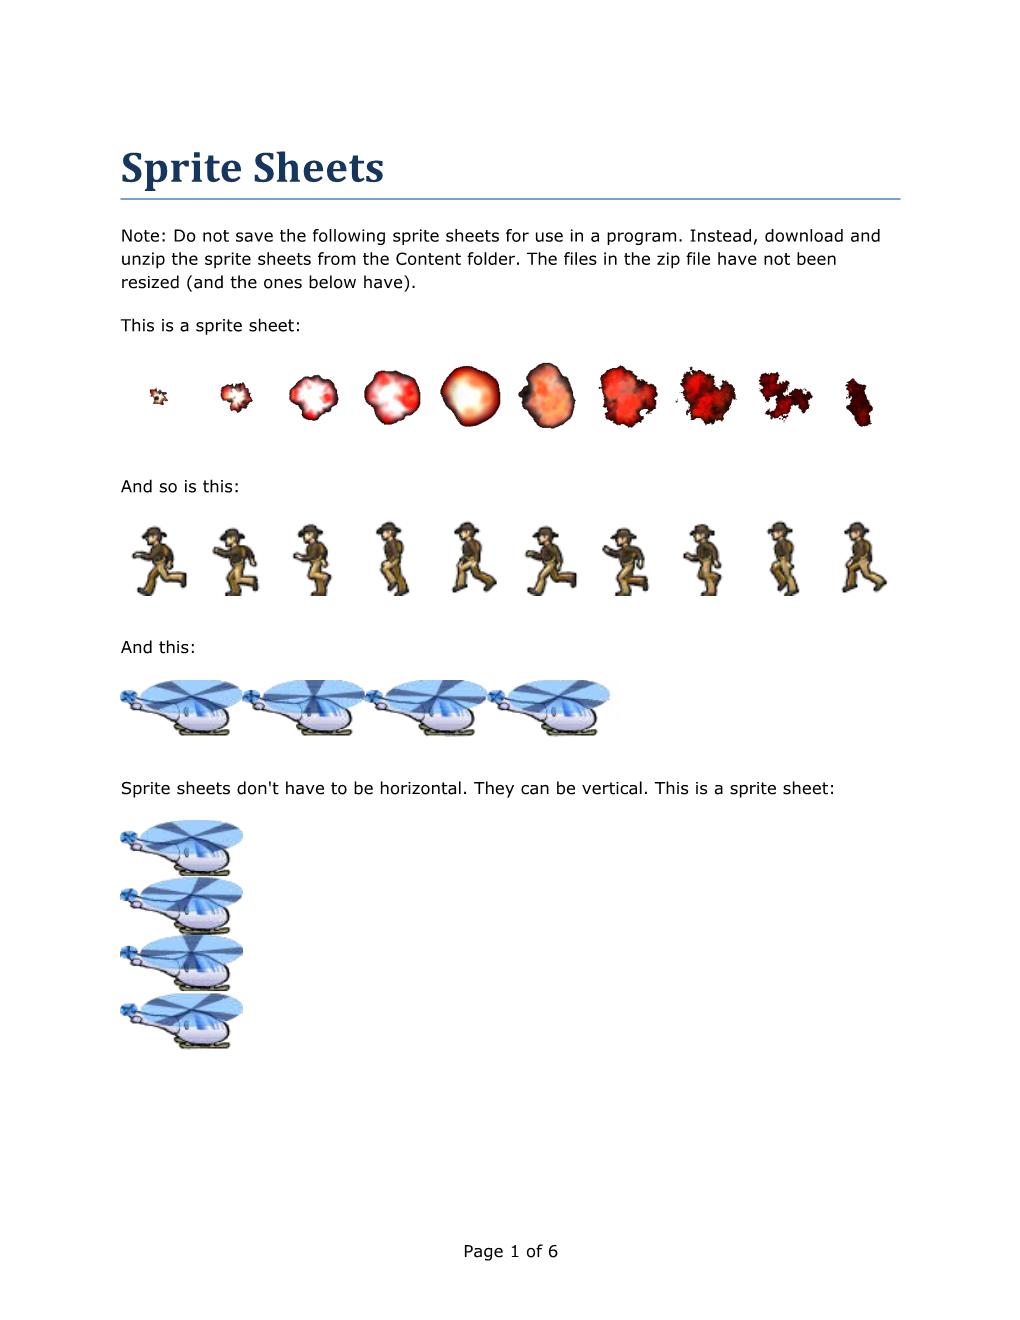 Sprite Sheets Don't Have to Be Horizontal. They Can Be Vertical. This Is a Sprite Sheet